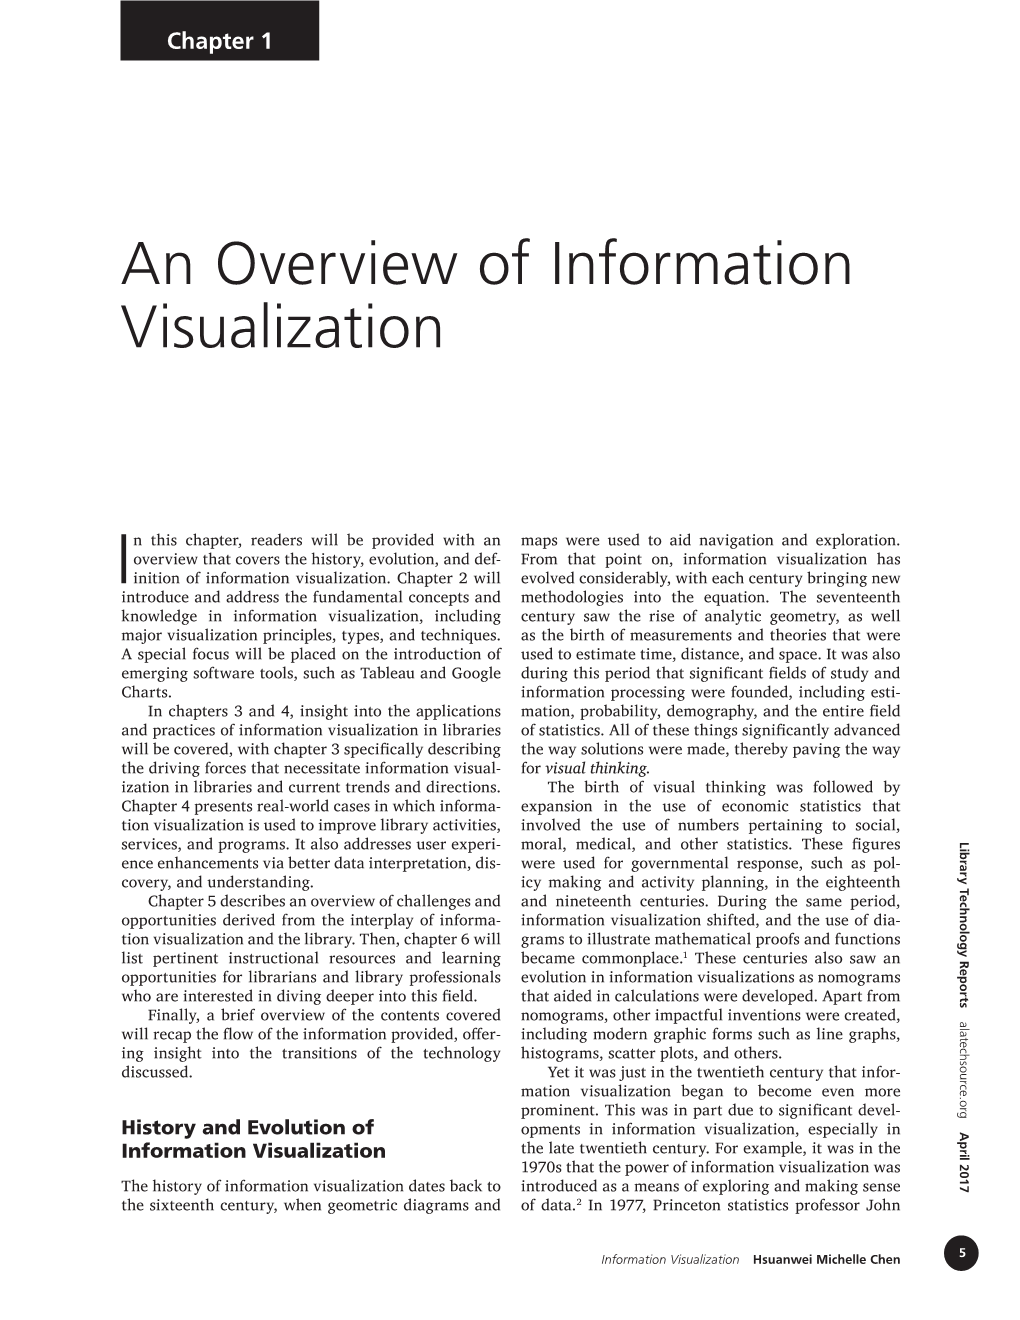 An Overview of Information Visualization